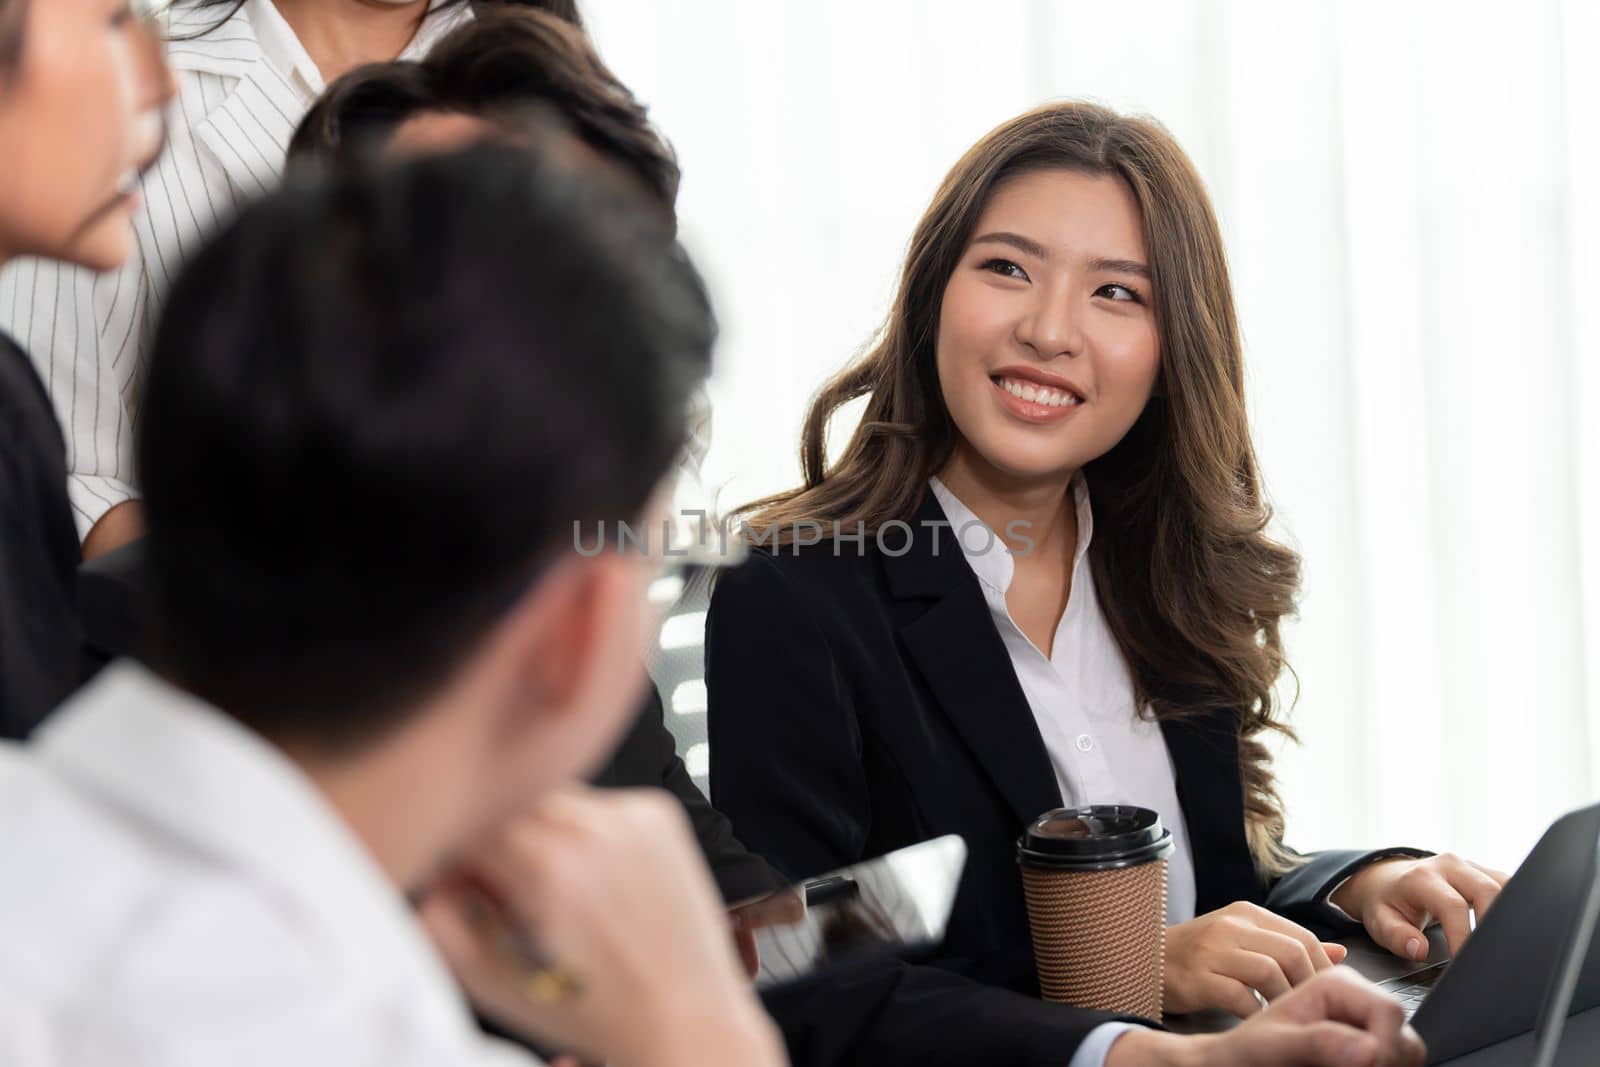 Focus portrait of female manger, businesswoman in the harmony meeting room with blurred of colleagues working together, analyzing financial paper report and dashboard data in background.